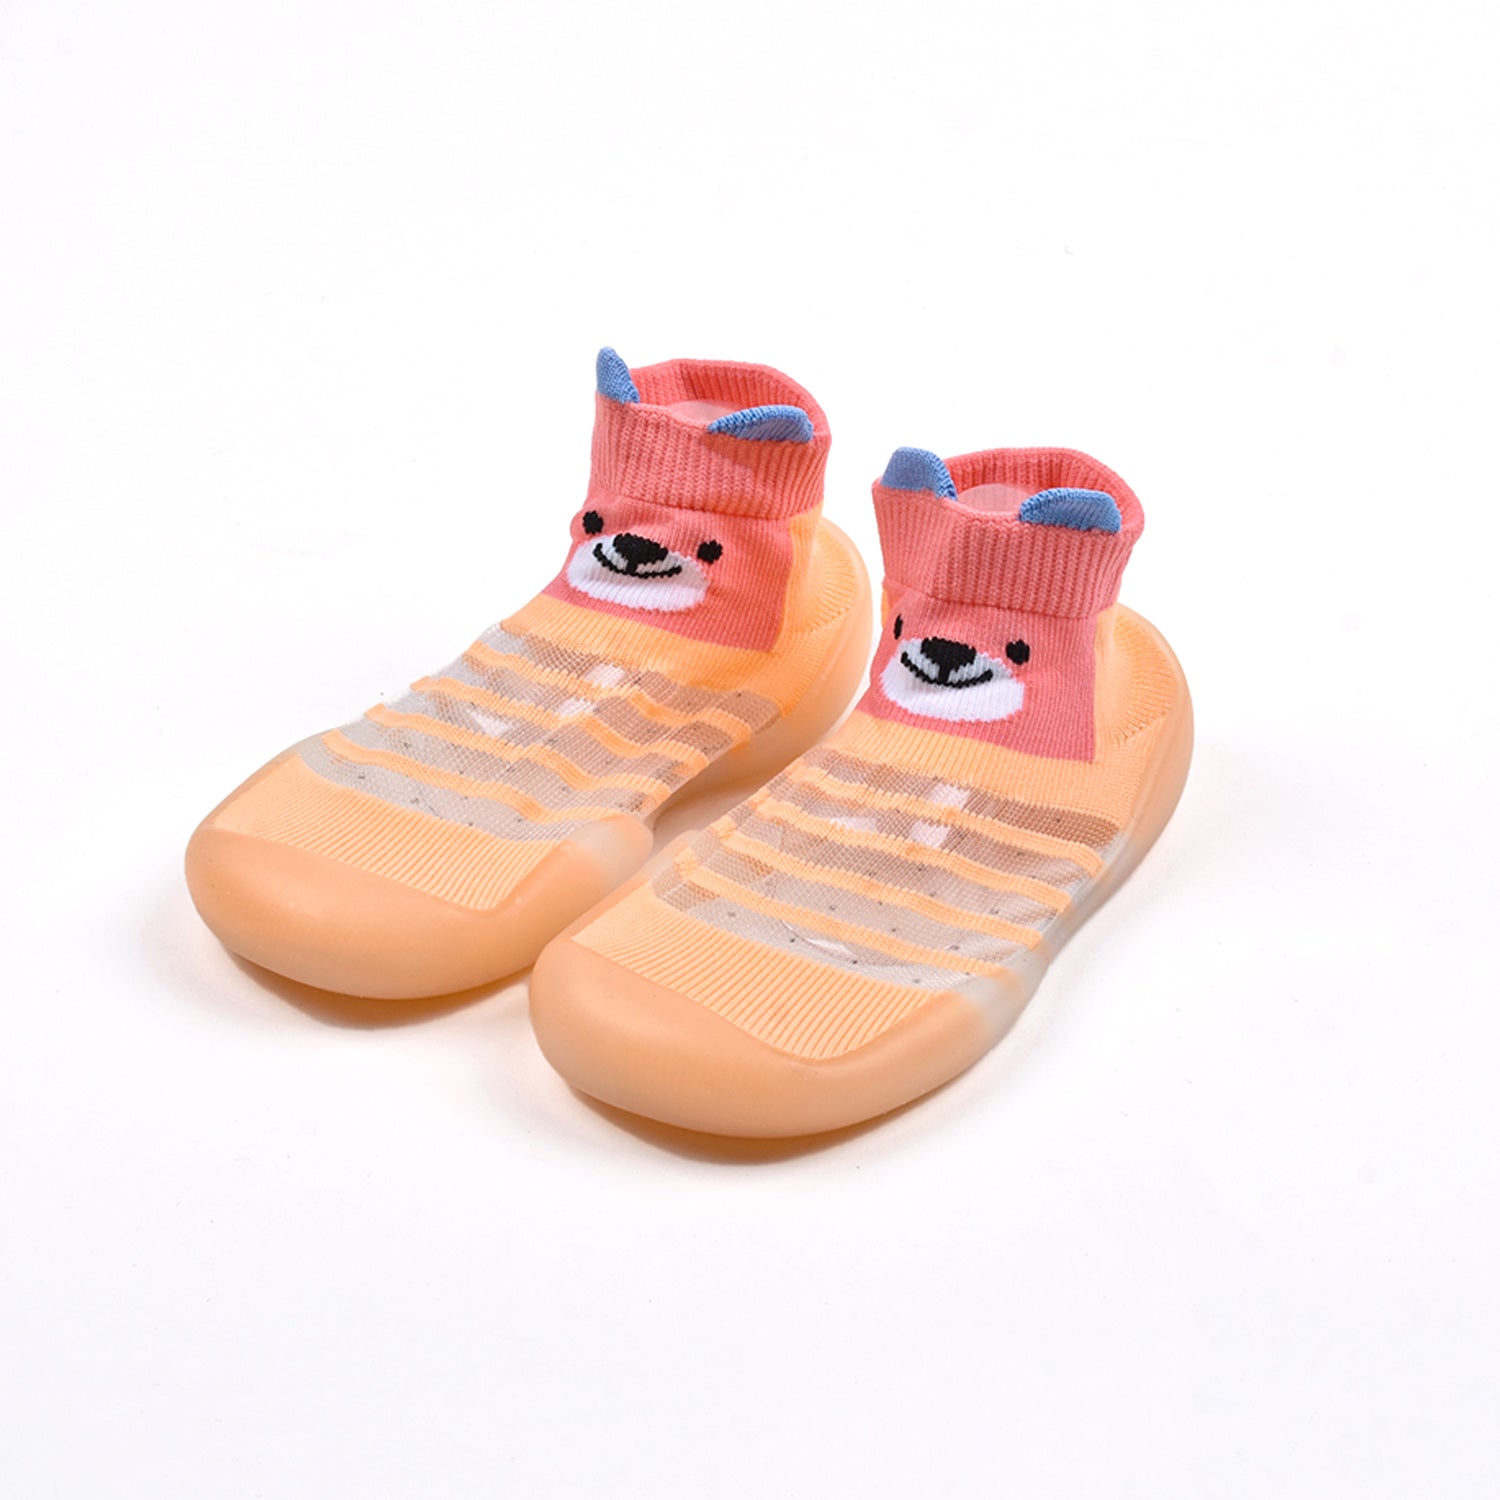 Baby Toddler Sock Shoes Soft Silicone Sole Shoes Breathable Cotton Shoes Anti-Slip for Kids Baby (Orange)